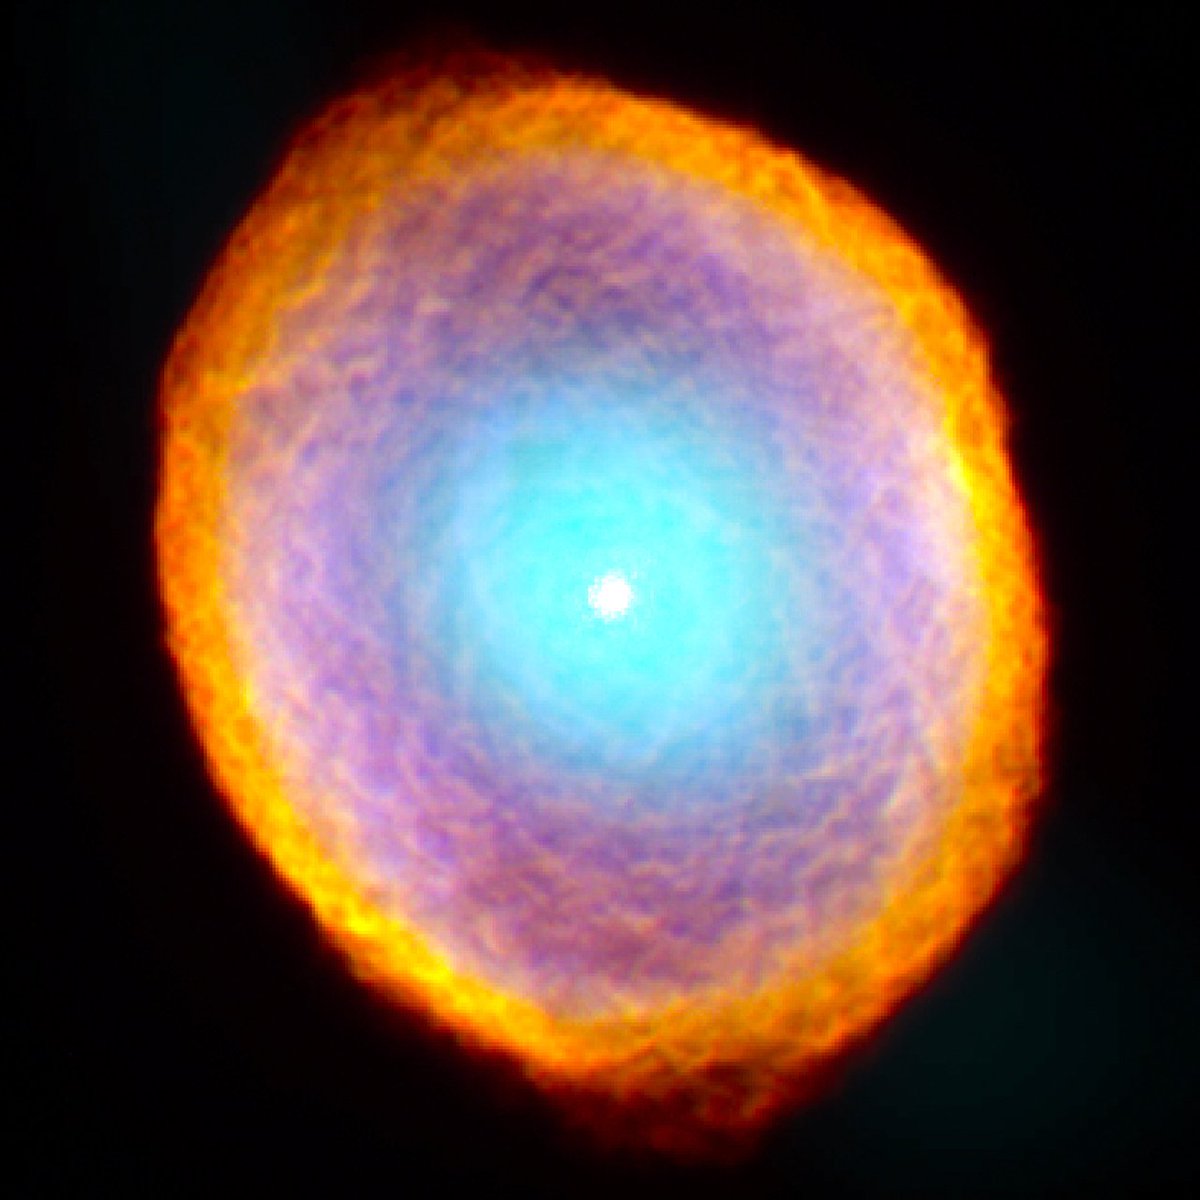 Can't go outside and watch the #eclipse today? Watch it online through the eyes of @NASA! Live coverage starts at 1pm EDT: go.nasa.gov/Eclipse2024Live Can't watch online either? Here's a bright, beautiful orb just for you. Planetary nebula IC 418, about 3,900 light-years away.